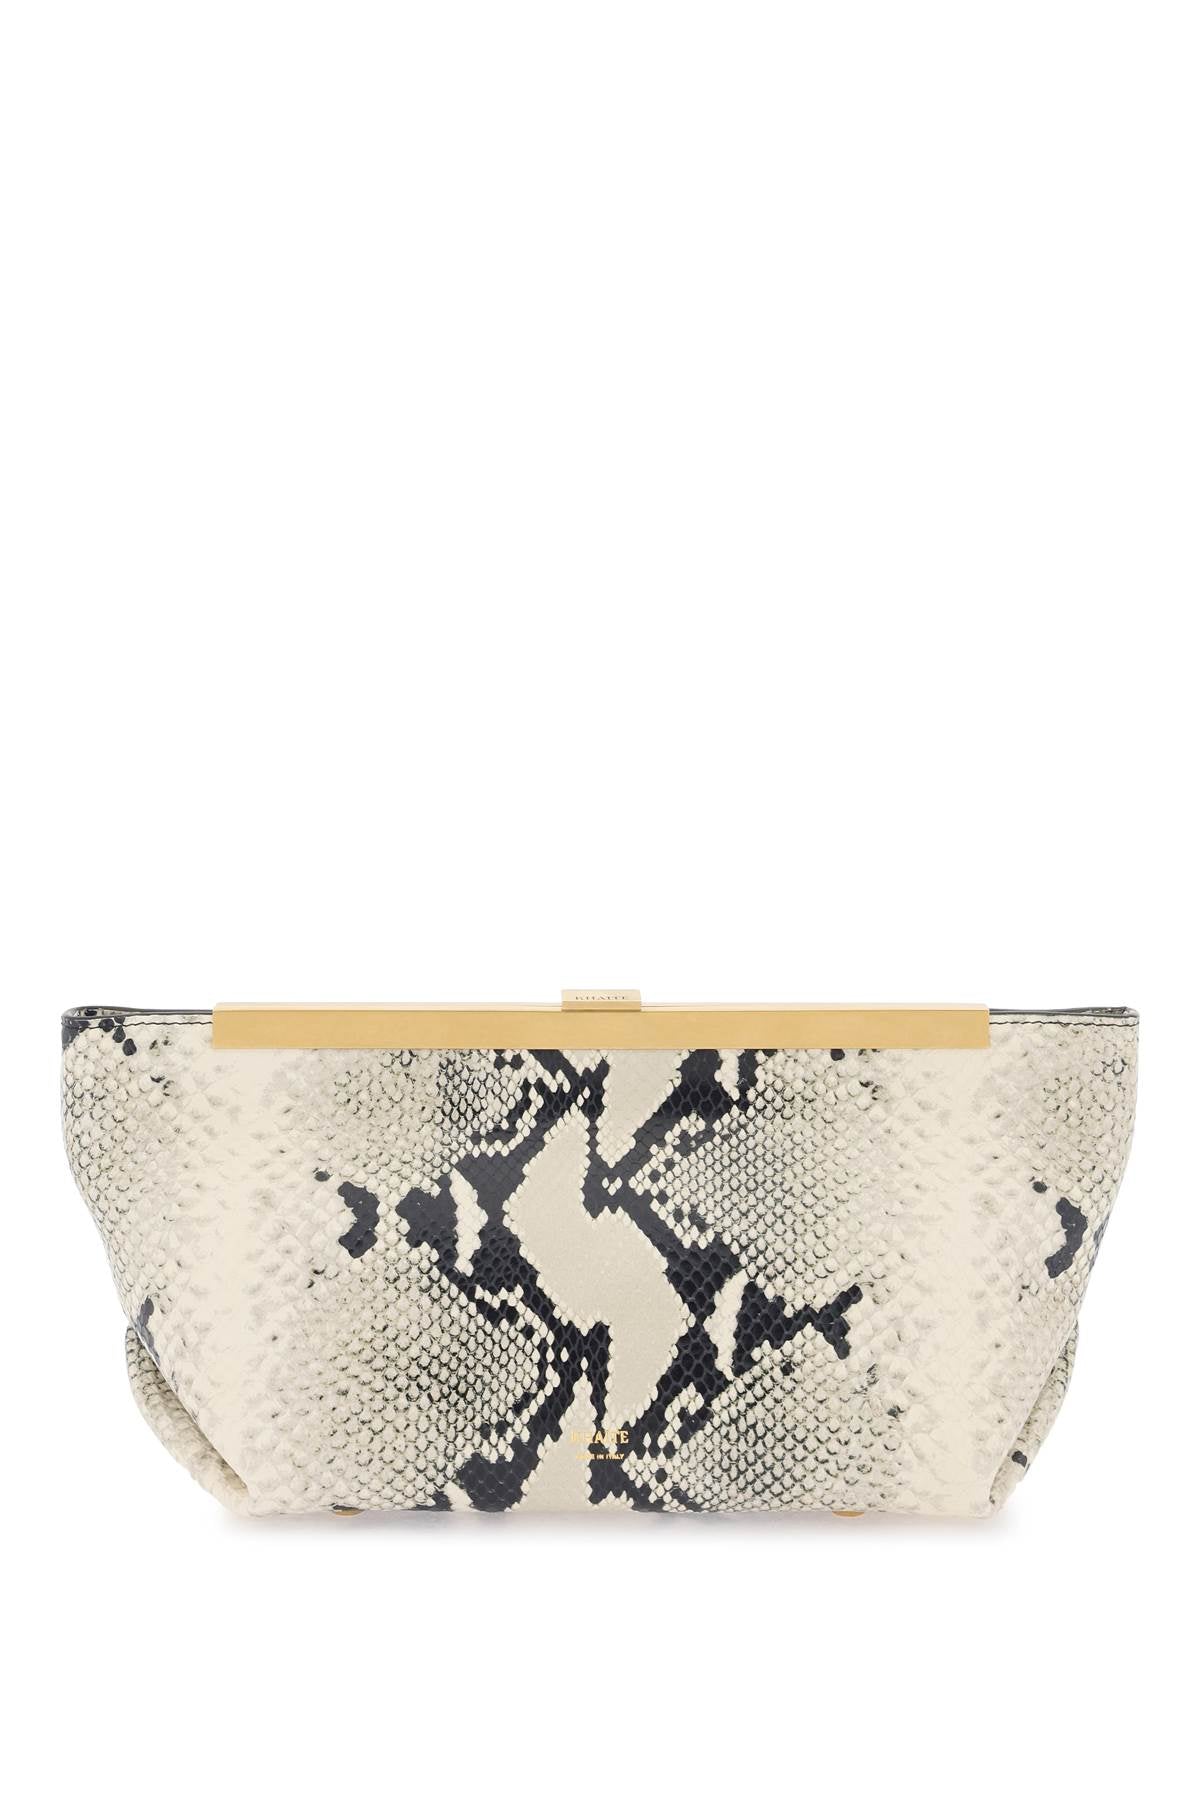 KHAITE Neutral Python Leather Clutch with Magnetic Closure